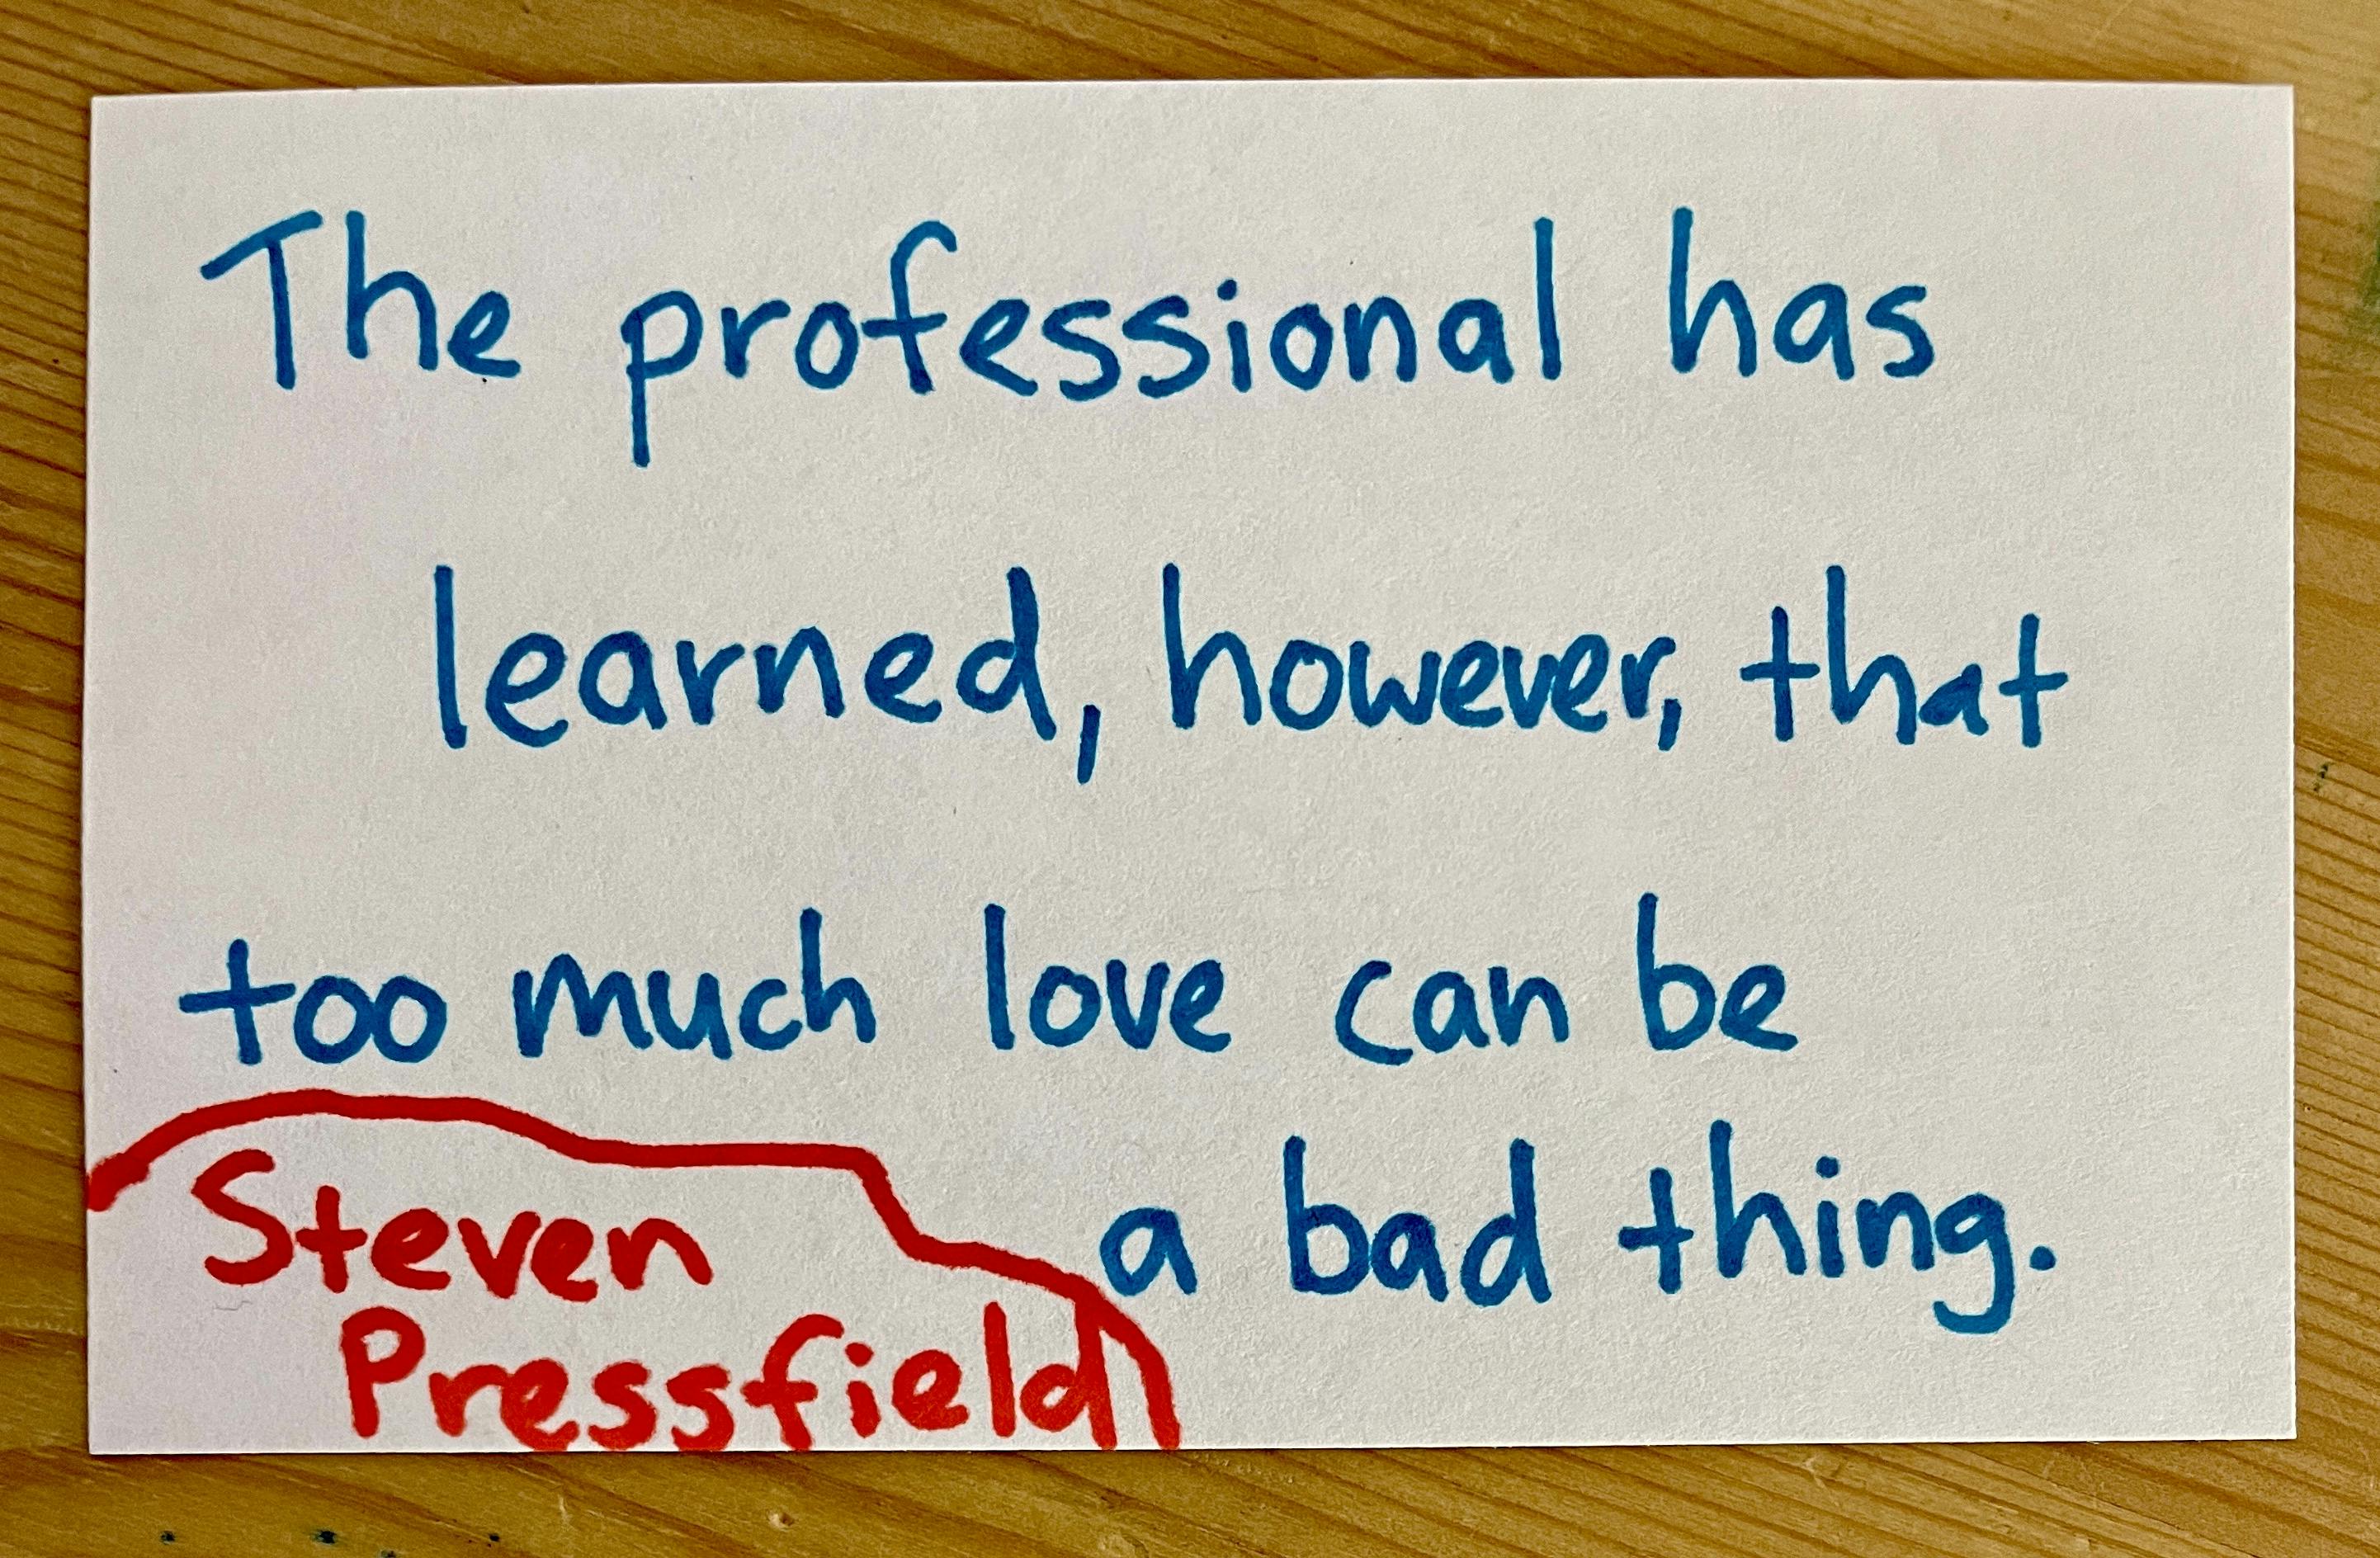 "The professional has learned, however, that too much love can be a bad thing." - Steven Pressfieldd